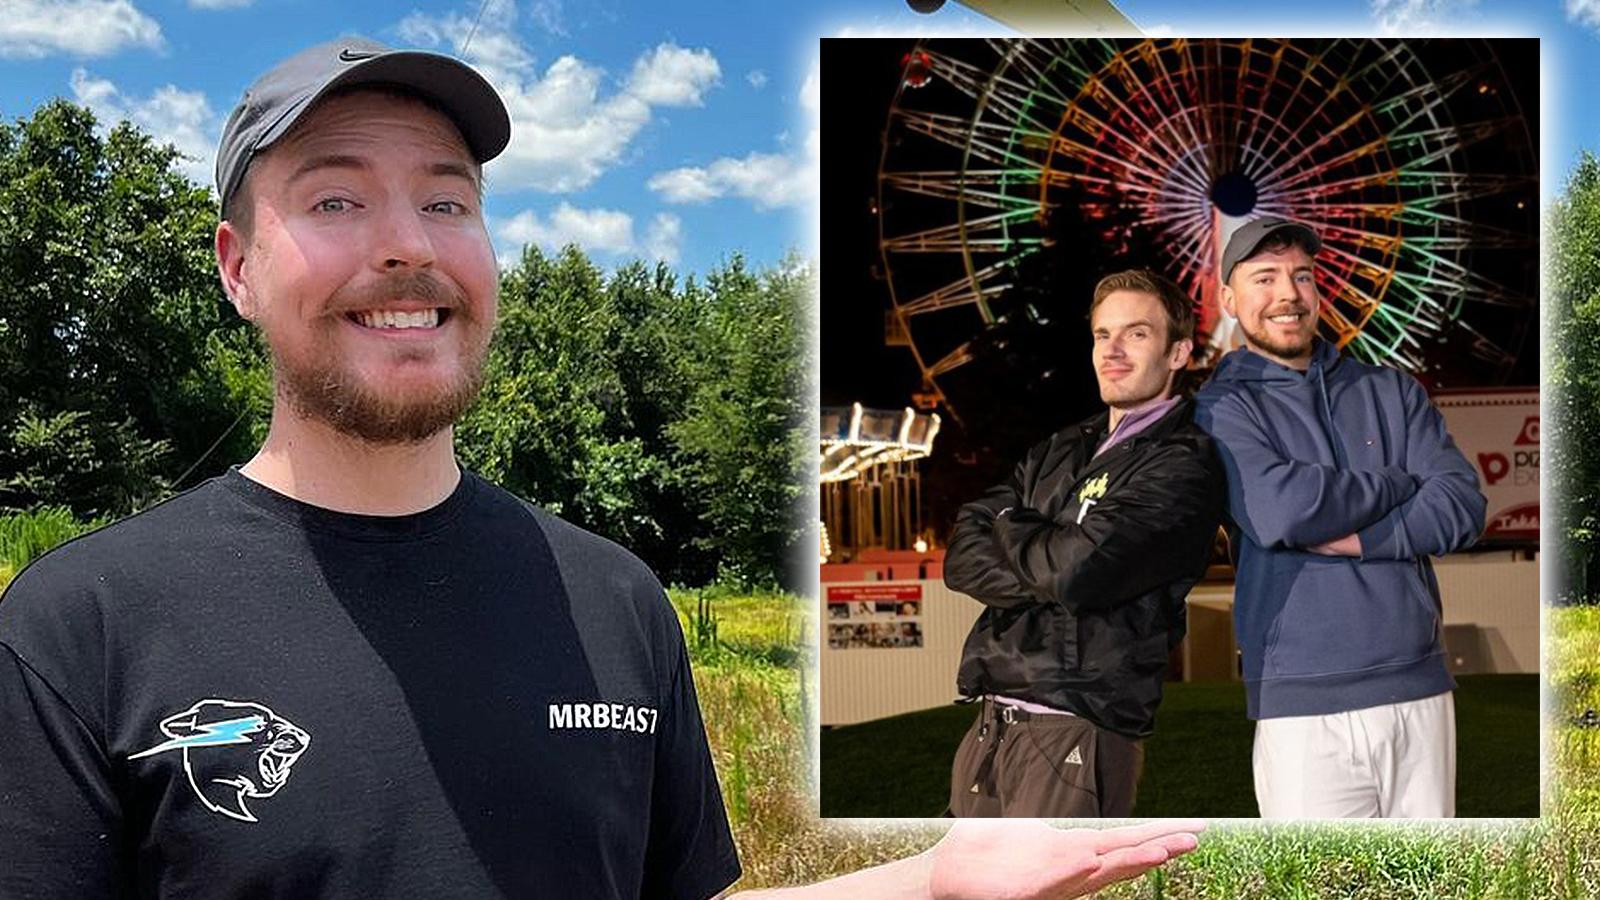 MrBeast teases biggest project yet after meeting pewdiepie